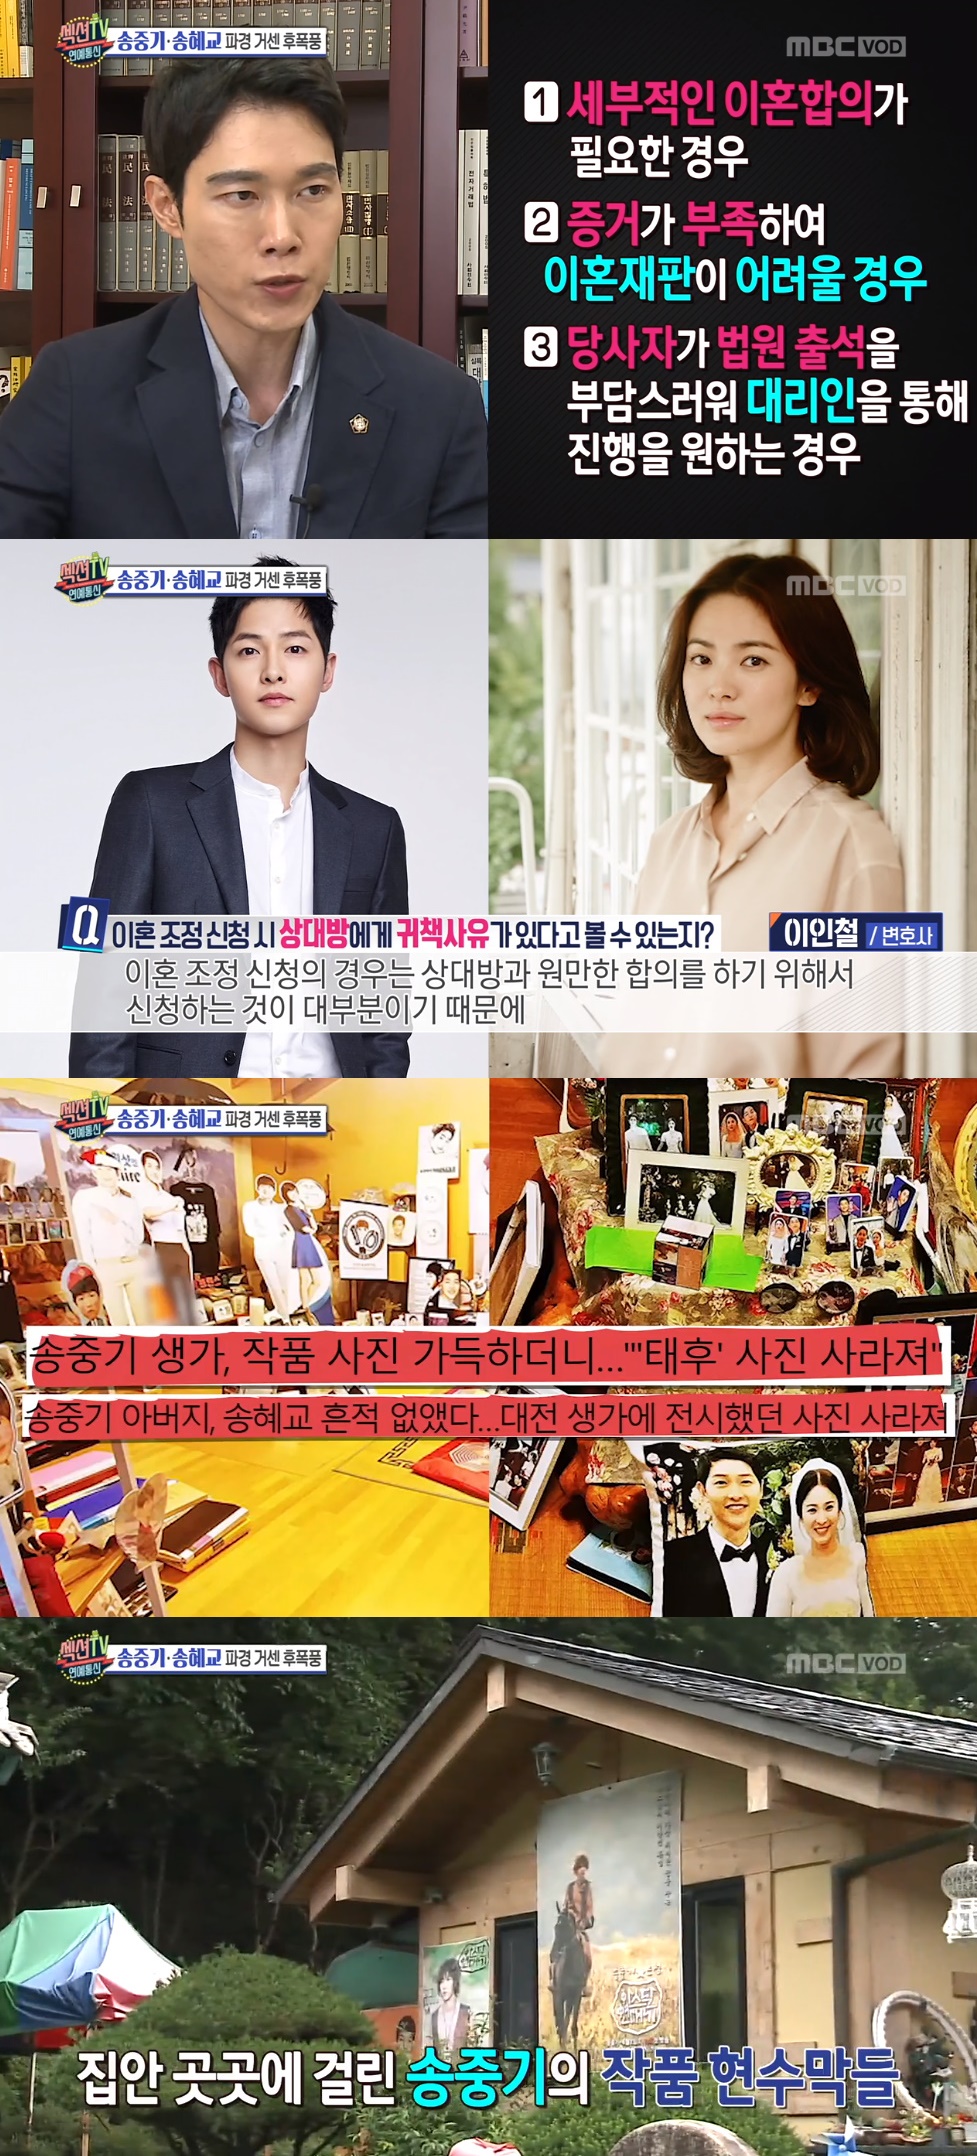 Actor Song Joong-ki, Song Hye-kyos Divorce After Storm is a progressive type.MBC Section TV Entertainment Communication (hereinafter referred to as Section) broadcast on the last 4 days deals with the news of Song Joong-ki and Song Hye-kyos divorce application, and the process of the production team visiting Daejeon and Taebaek was reported.Song Joong-ki and Song Hye-kyo shocked the public by revealing that they received a divorce settlement application directly through the media on June 27th.The two met as actors in the KBS 2TV drama Dawn of the Sun in 2015 and married on October 31, 2017, after two years of devotion.There were a lot of domestic and foreign fans who supported the drama of Song Song Couple and the marriage process. Even though the divorce announcement of the two people has passed a week, interest in the reason and the aftermath is still pouring.On the day of the divorce news of Song Joong-ki and Song Hye-kyo, Securities Jirashi, which speculated on the cause of the divorce of the two, was circulated. On the next day, Song Joong-kis Daejeon home was known to have removed all pictures of Song Hye-kyo and Dawn of the SunSo, Song Joong-ki birthplace and Song Joong-ki father came to mind as the first real-time search term of portal site.Section crews visited Daejeon to confirm the facts; residents were saddened, saying, We removed the picture immediately after the next day.Gangwon Taebaek city is also in trouble over the news of Song Joong-ki, Song Hye-kyos divorce.Taibaek city, which has been promoting various tourism projects based on the drama Dawn of the Sun, was scheduled to hold the Taebaek Couple Festival for the third time this year, but their divorce canceled the event.But the Premortal Park will remain in the future.An official of Taibaek city said, Because of the Yi Gi, which is a motif of the drama Dawn of the Sun, it is planned to install and operate the post-war park and drama set, and there is no plan to demolish the song couple because it is separated. He said.Visitors surged on the weekend when news of the divorce was heard, in case a statue was made after Song Joong-ki and Song Hye-kyo were kissed in the play, but the statue remained undestructed.On the same day, Lee In-cheol explained why Song Joong-ki and Song Hye-kyo chose divorce adjustment.Lee In-cheol said, There are three reasons for divorce mediation. If the first detailed divorce agreement is needed, if the divorce trial is difficult due to a lack of evidence, the third party is burdened with court attendance, He said.If there is certain reason for the other partys fault, and there is certain evidence, there is a lot of cases where a divorce trial is not a divorce mediation, but a formal divorce trial. In the case of divorce mediation application, it is unreasonable to interpret that there is a reason for the other party to apply for a smooth agreement with the other party because of Yi Gi In addition, lawyer Lee In-cheol said, I do not have children (Song Joong-ki, Song Hye-kyo) and I expect that it will be agreed smoothly in the divorce settlement process between 3-6 months because it has been agreed on divorce between the parties.